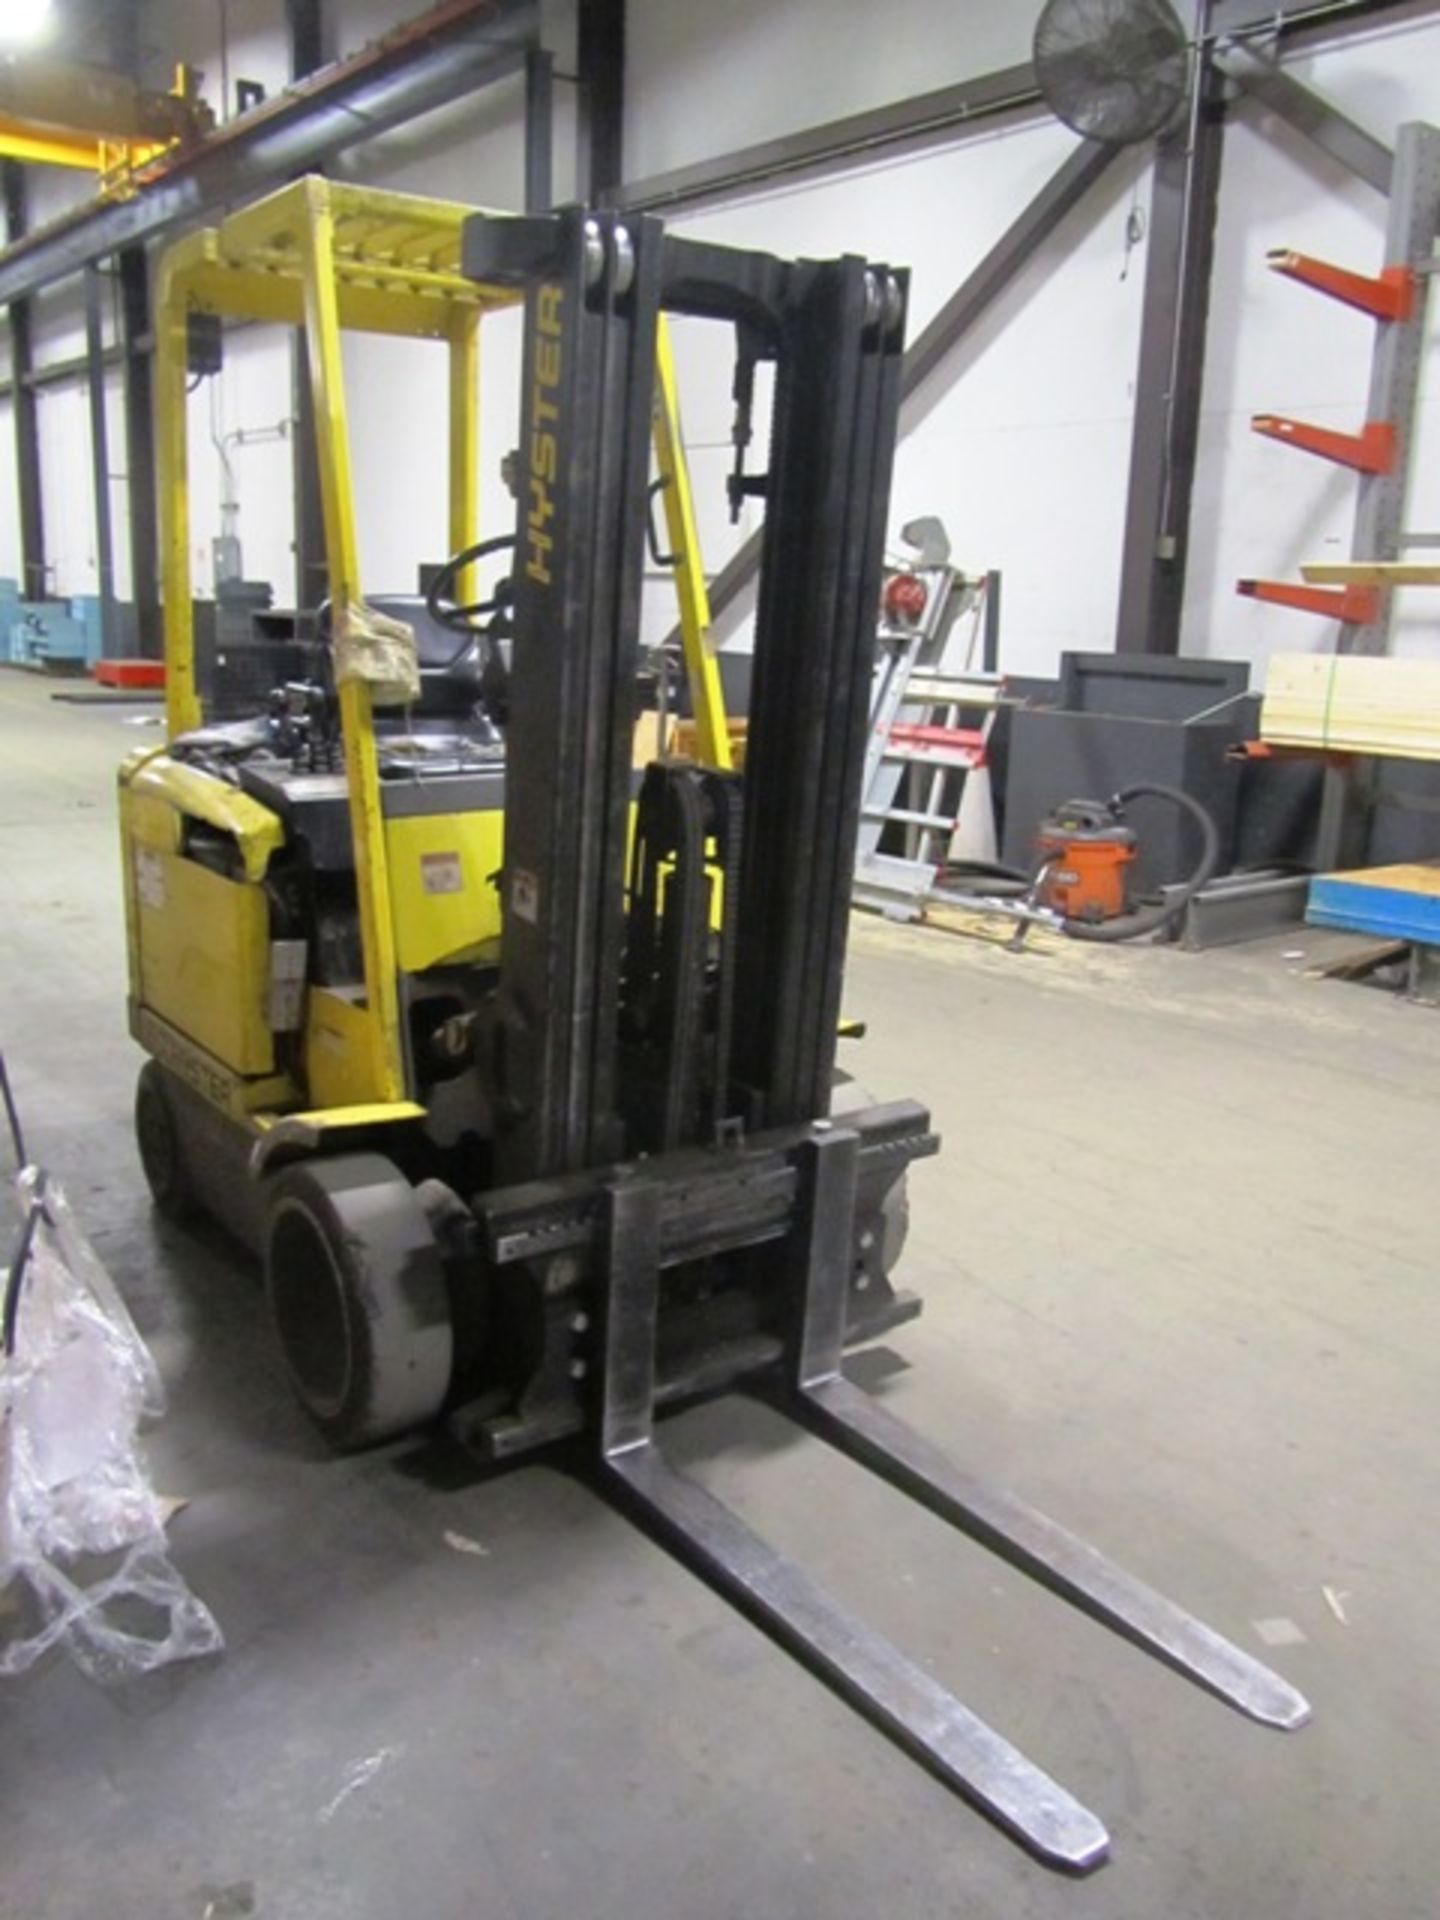 Hyster Model E50XM-27 3,000lb Capacity Electric Forklift - Image 2 of 3